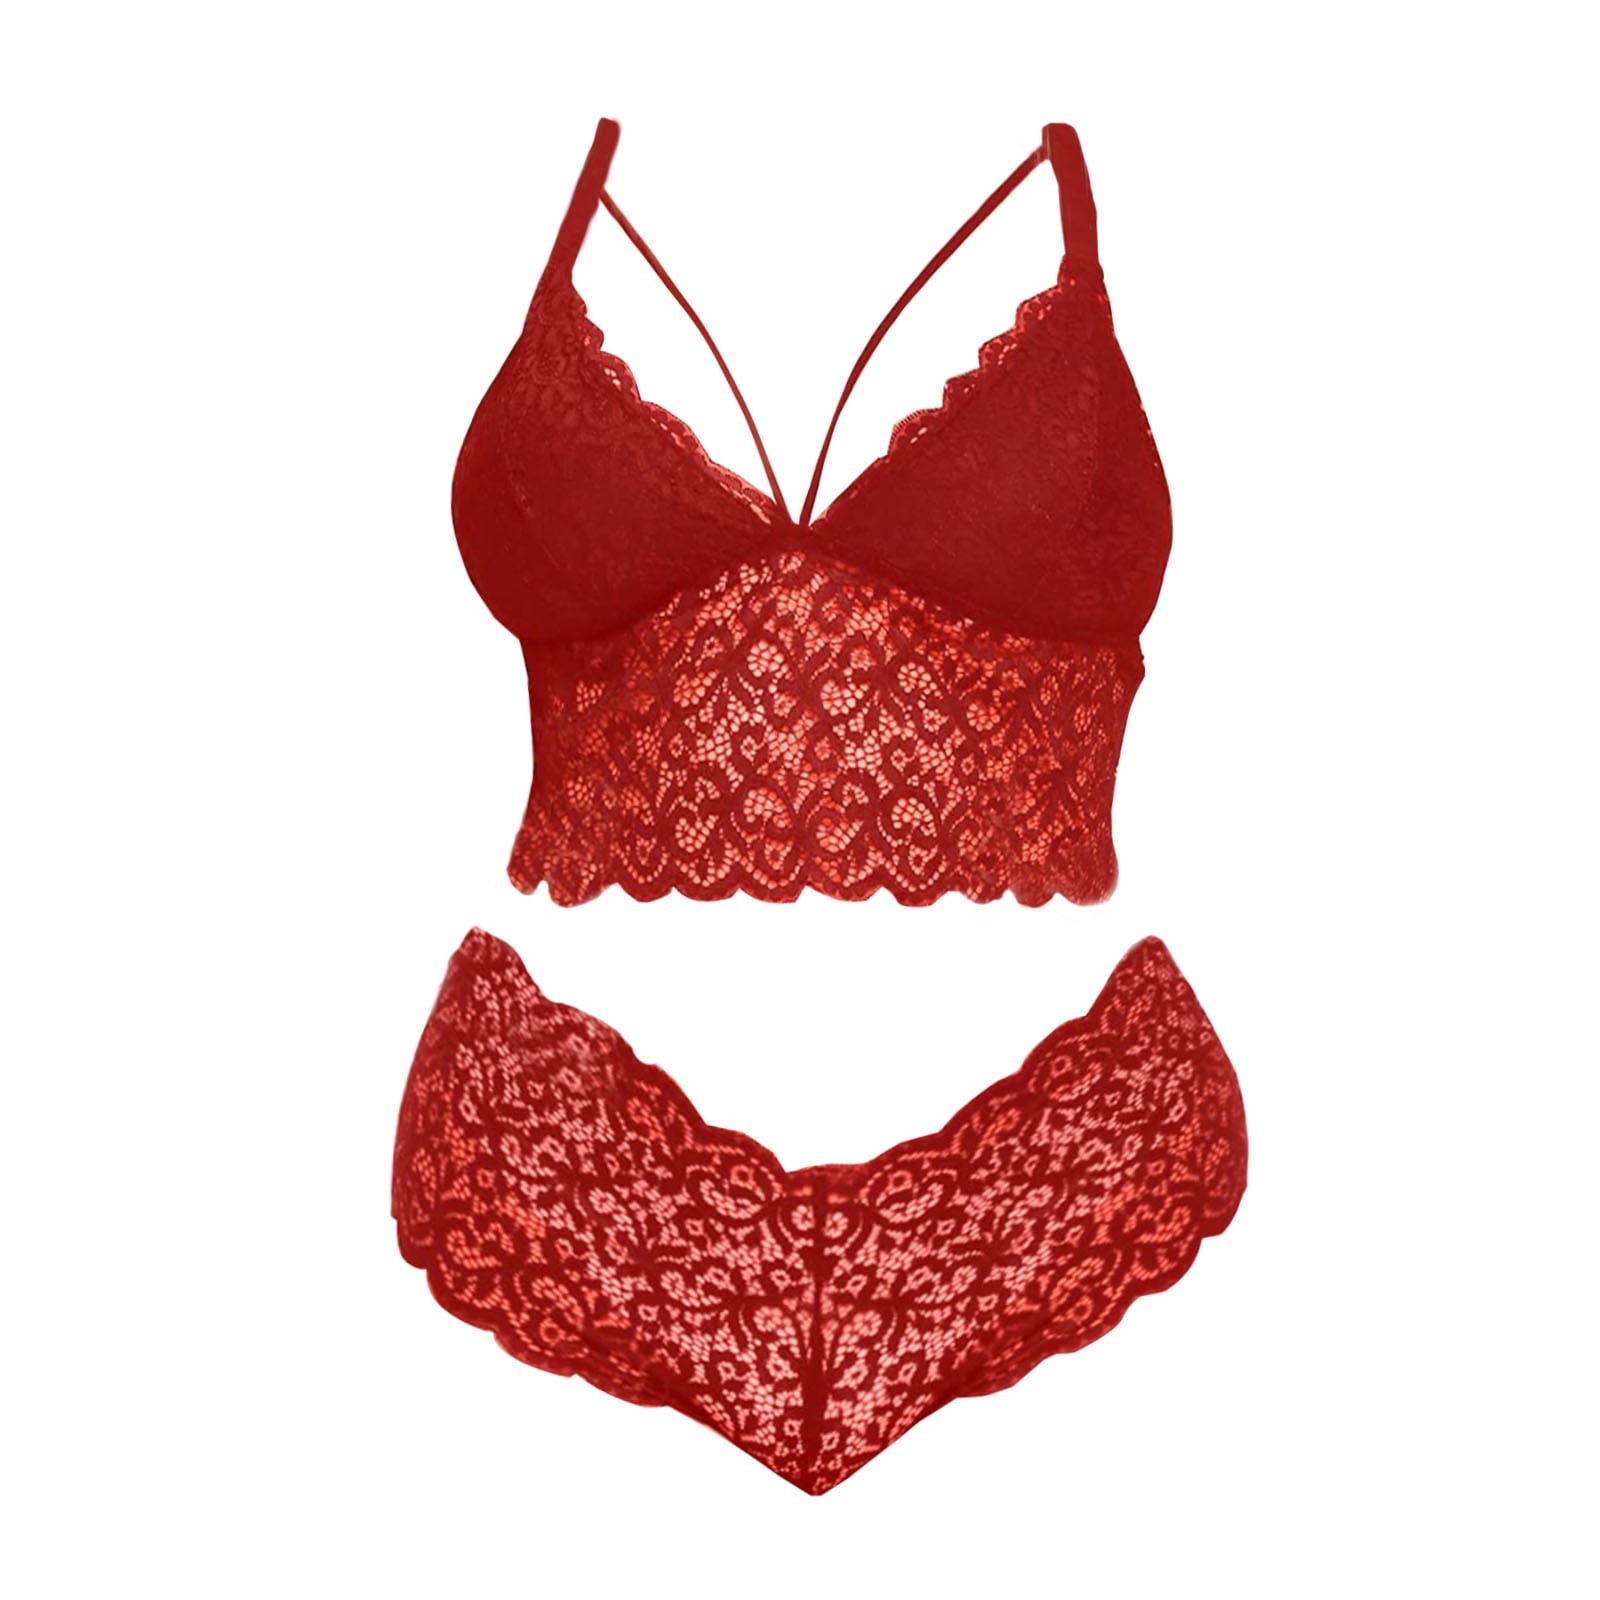 Buy Glus Bridal Net Unlined Non Padded Non Wire Bra & String Bikini Panty  Set, Color - Red Online at Low Prices in India 